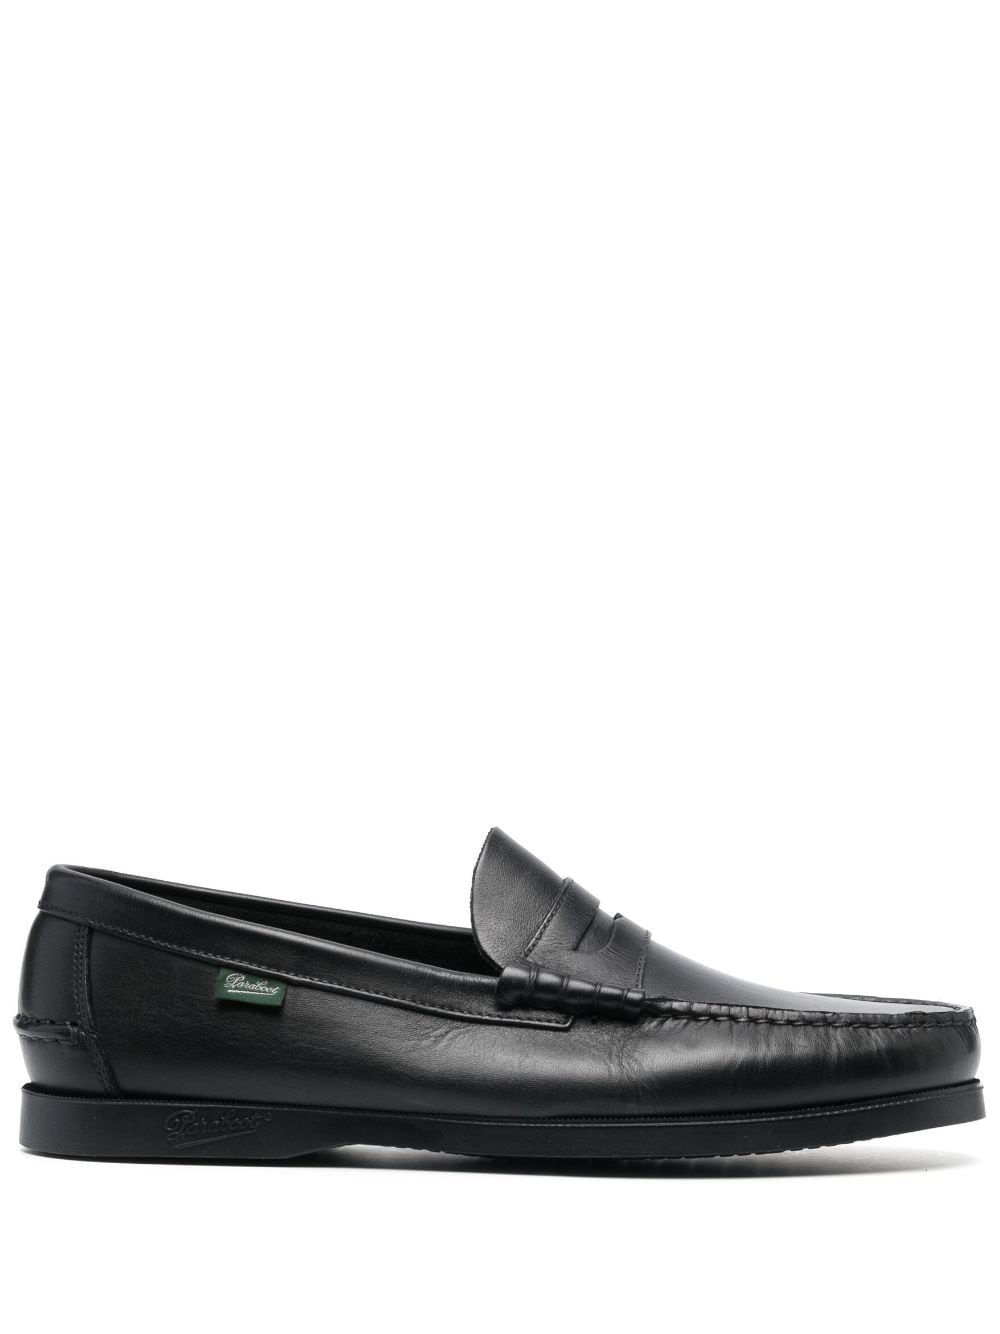 Paraboot leather penny loafers - Black von Paraboot